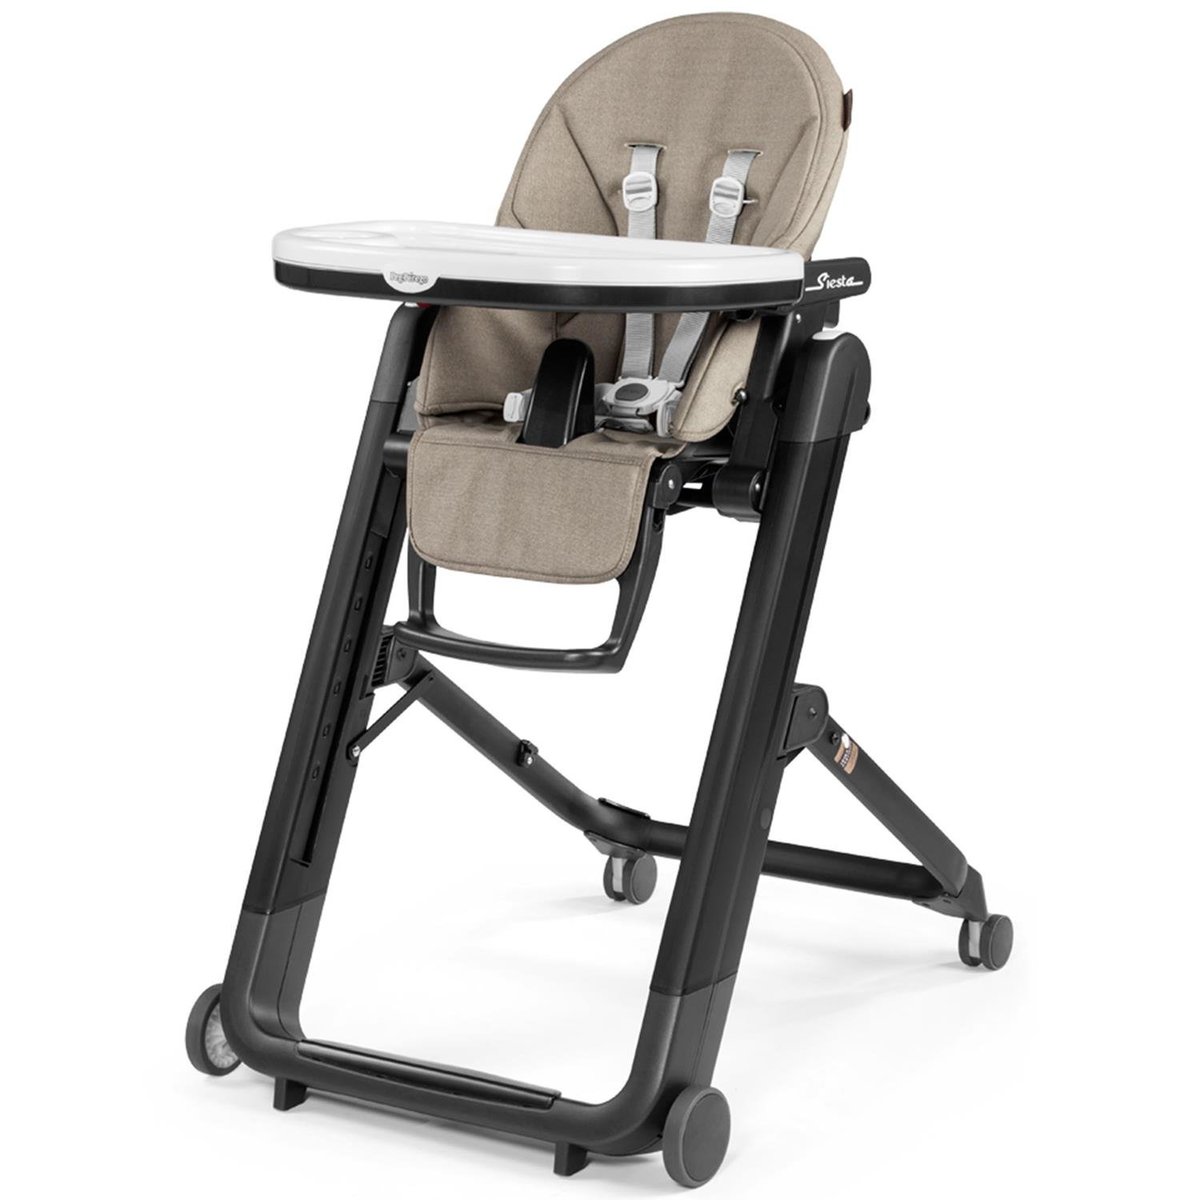 SIESTA HIGH CHAIR - ECO LEATHER | GINGER GREY